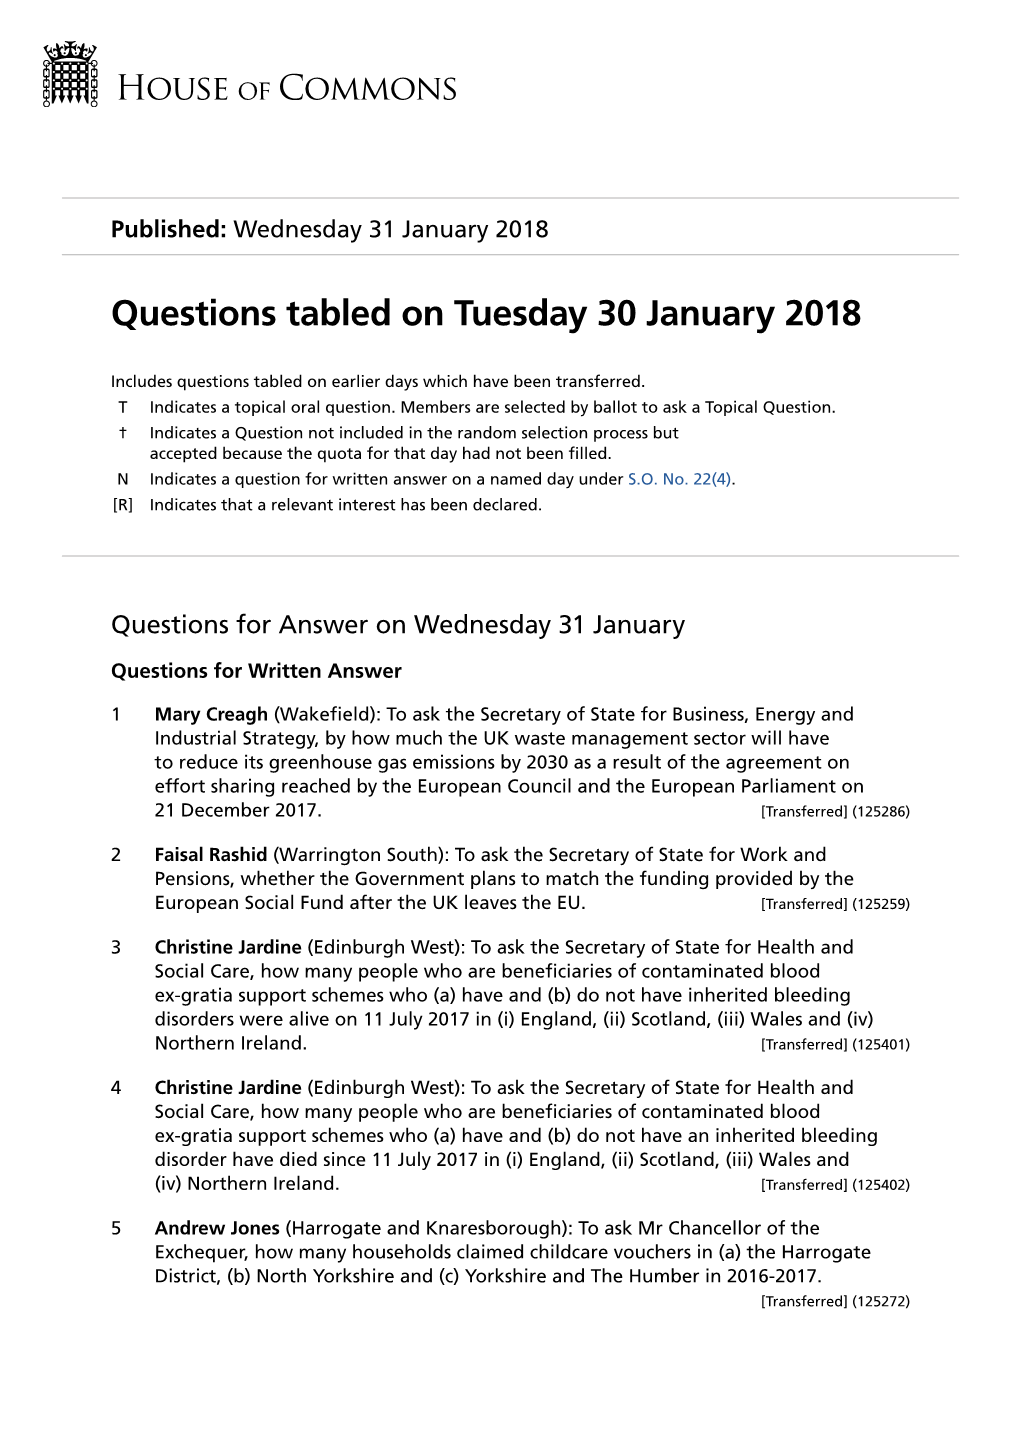 Questions Tabled on Tuesday 30 January 2018